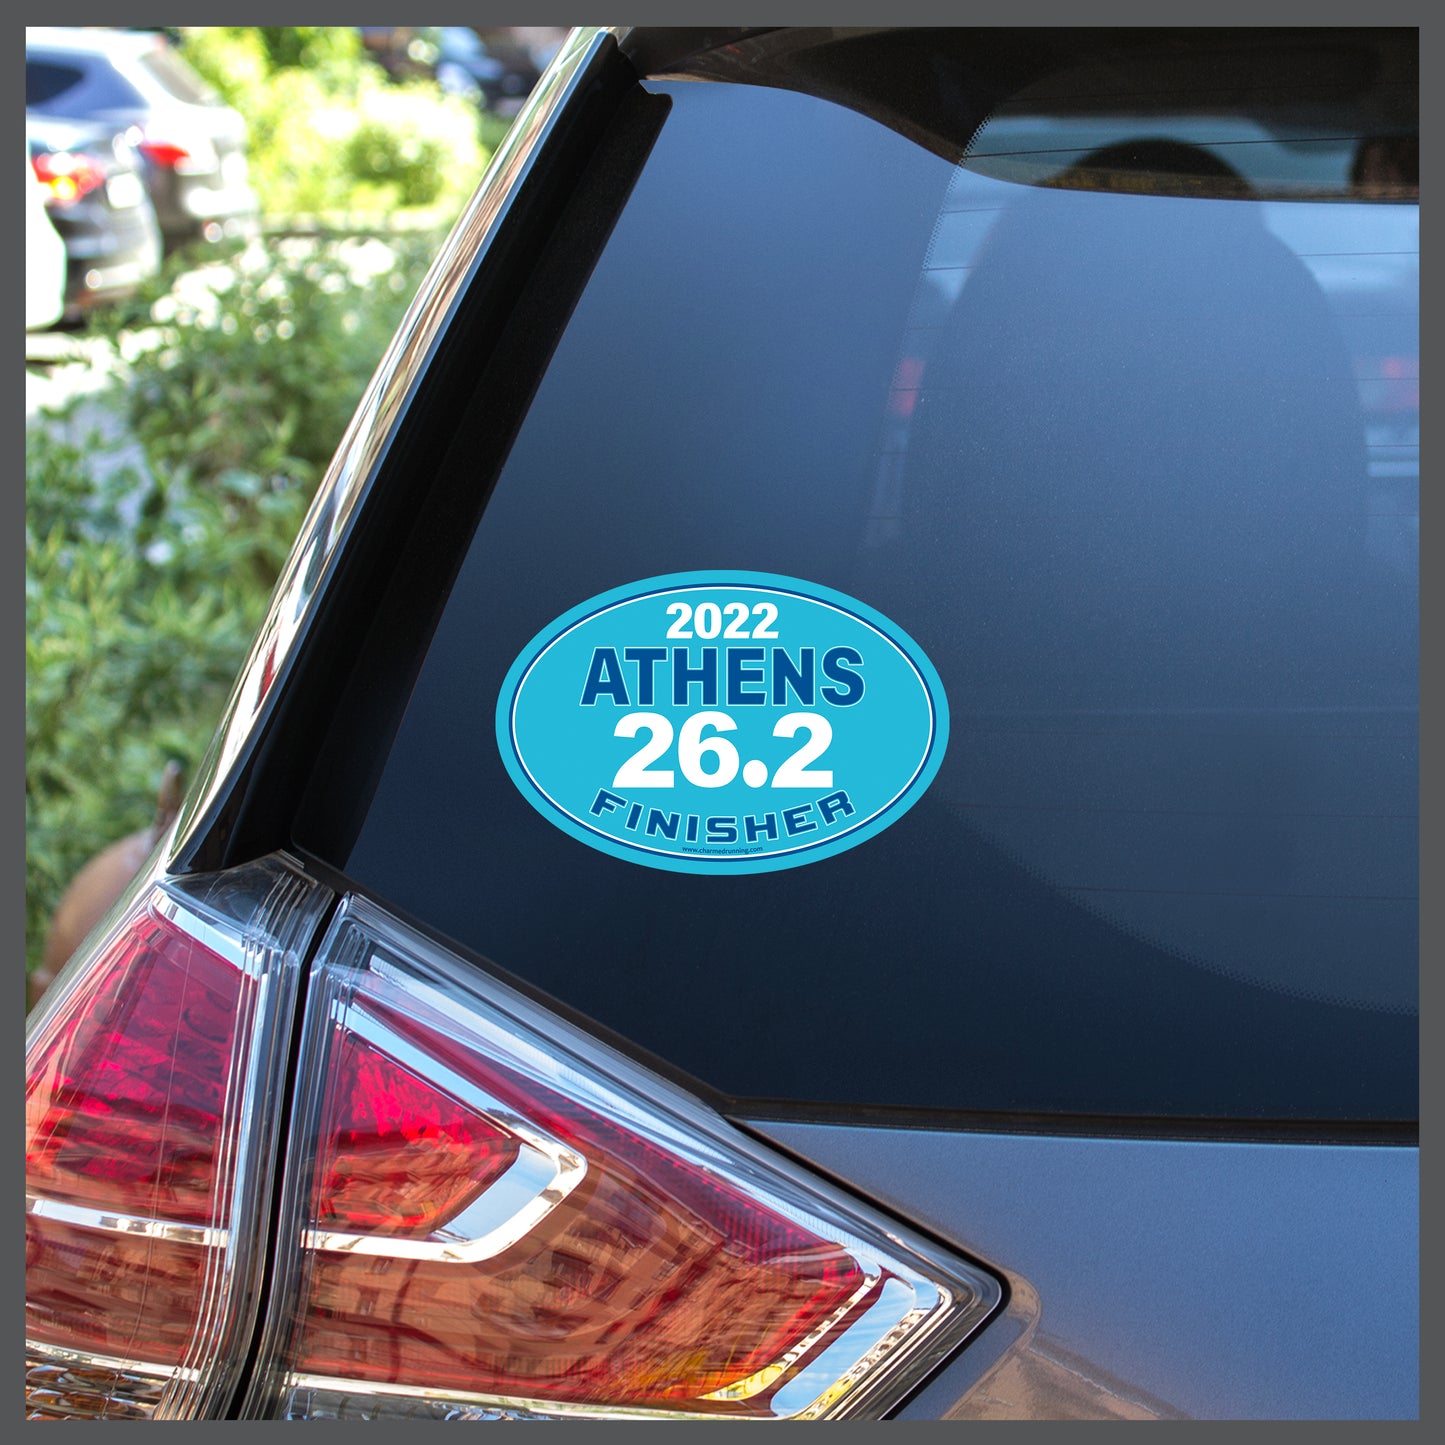 Athens 26.2 Marathon FINISHER Decal or Car Magnet with Custom Year Option